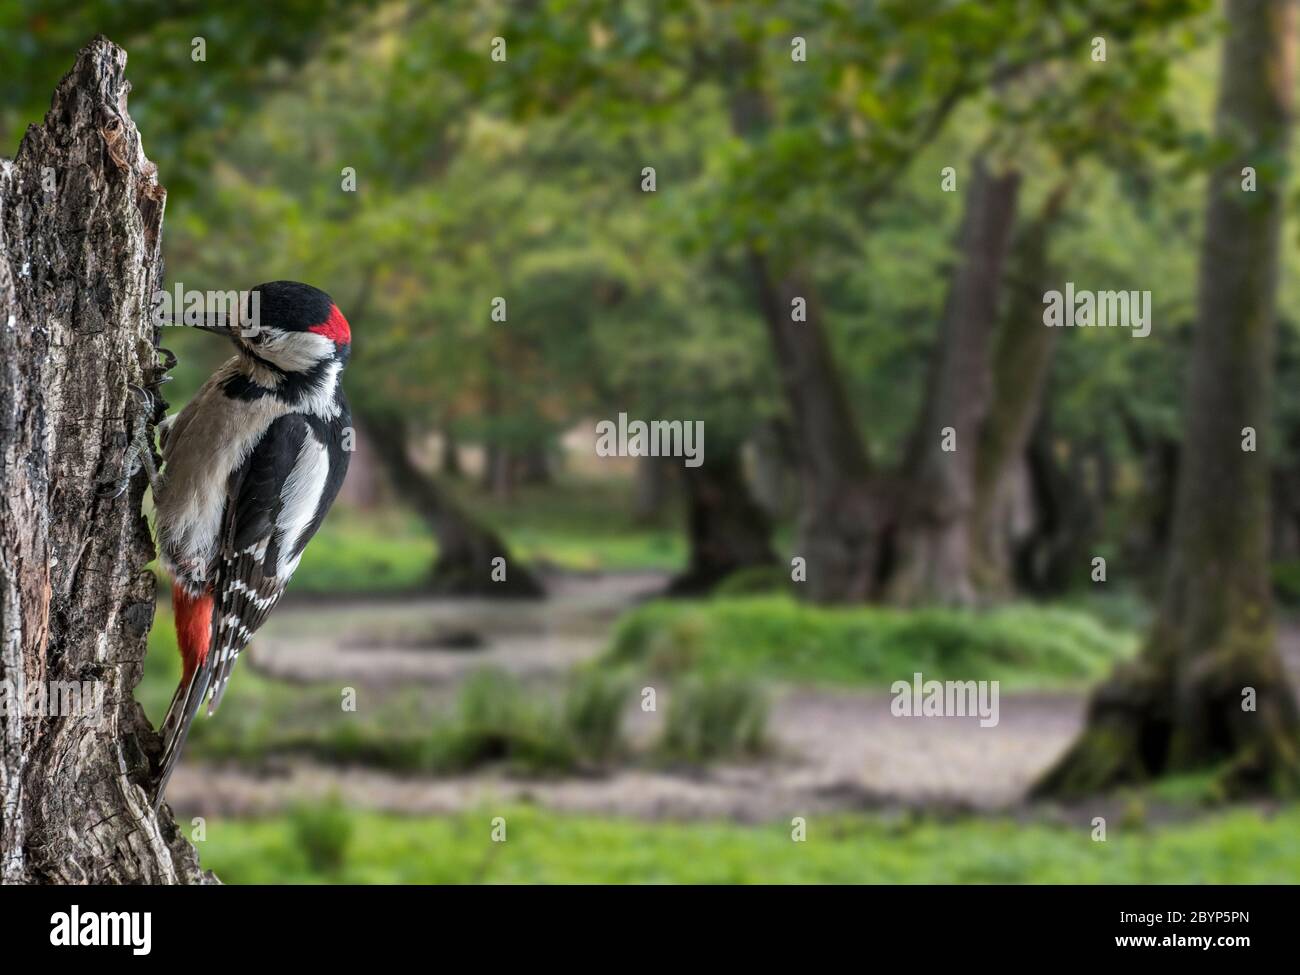 Great spotted woodpecker / greater spotted woodpecker (Dendrocopos major) male hammering on tree stump in forest Stock Photo